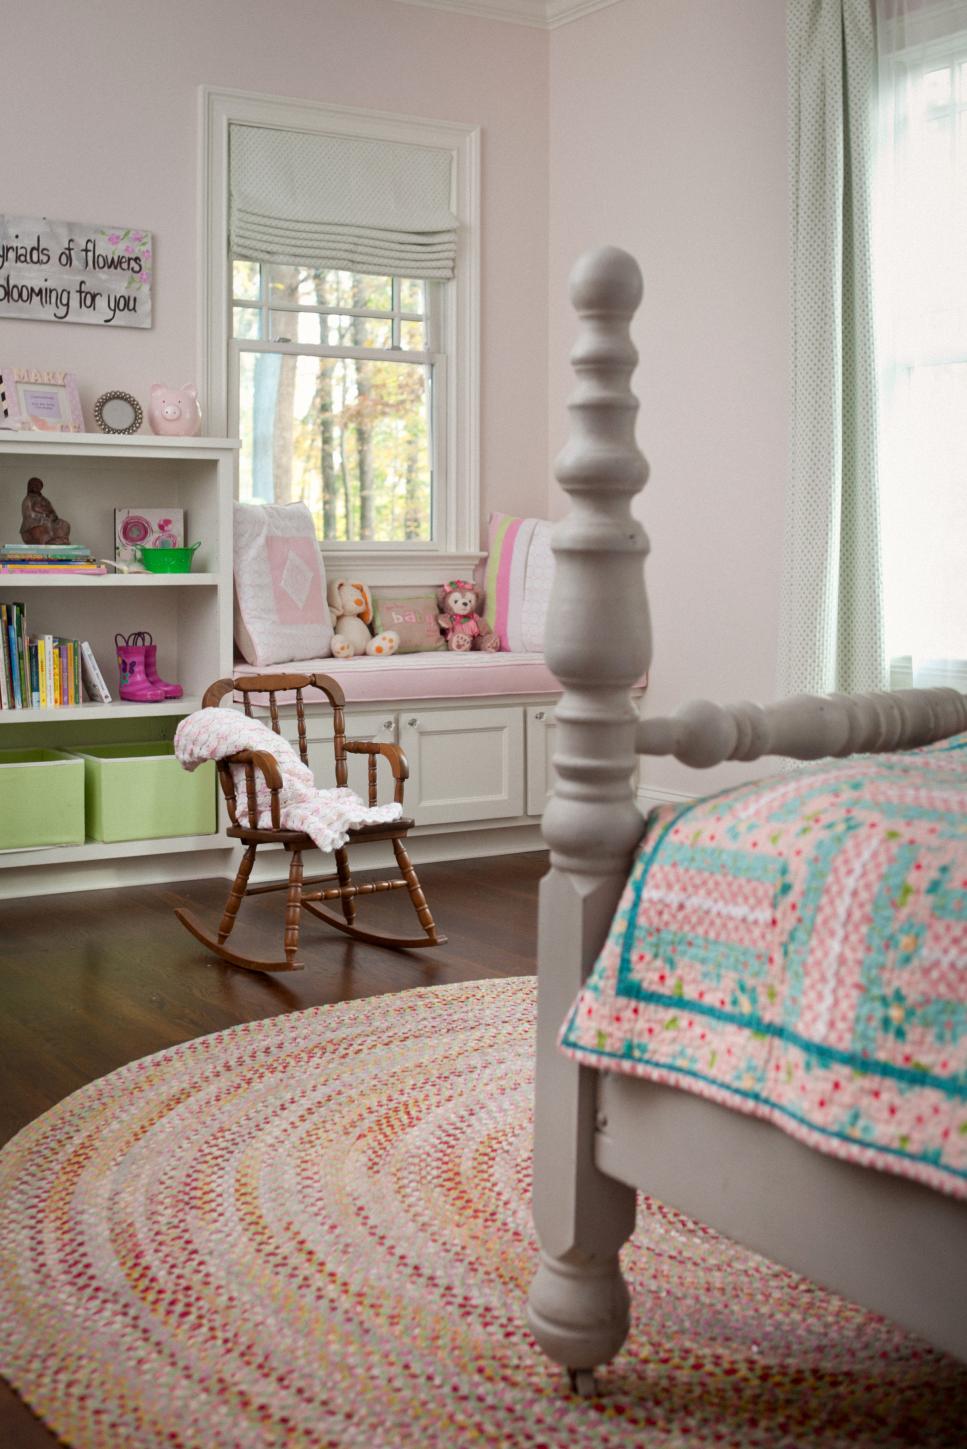 Pink Girl's Room With Small Rocking Chair | HGTV